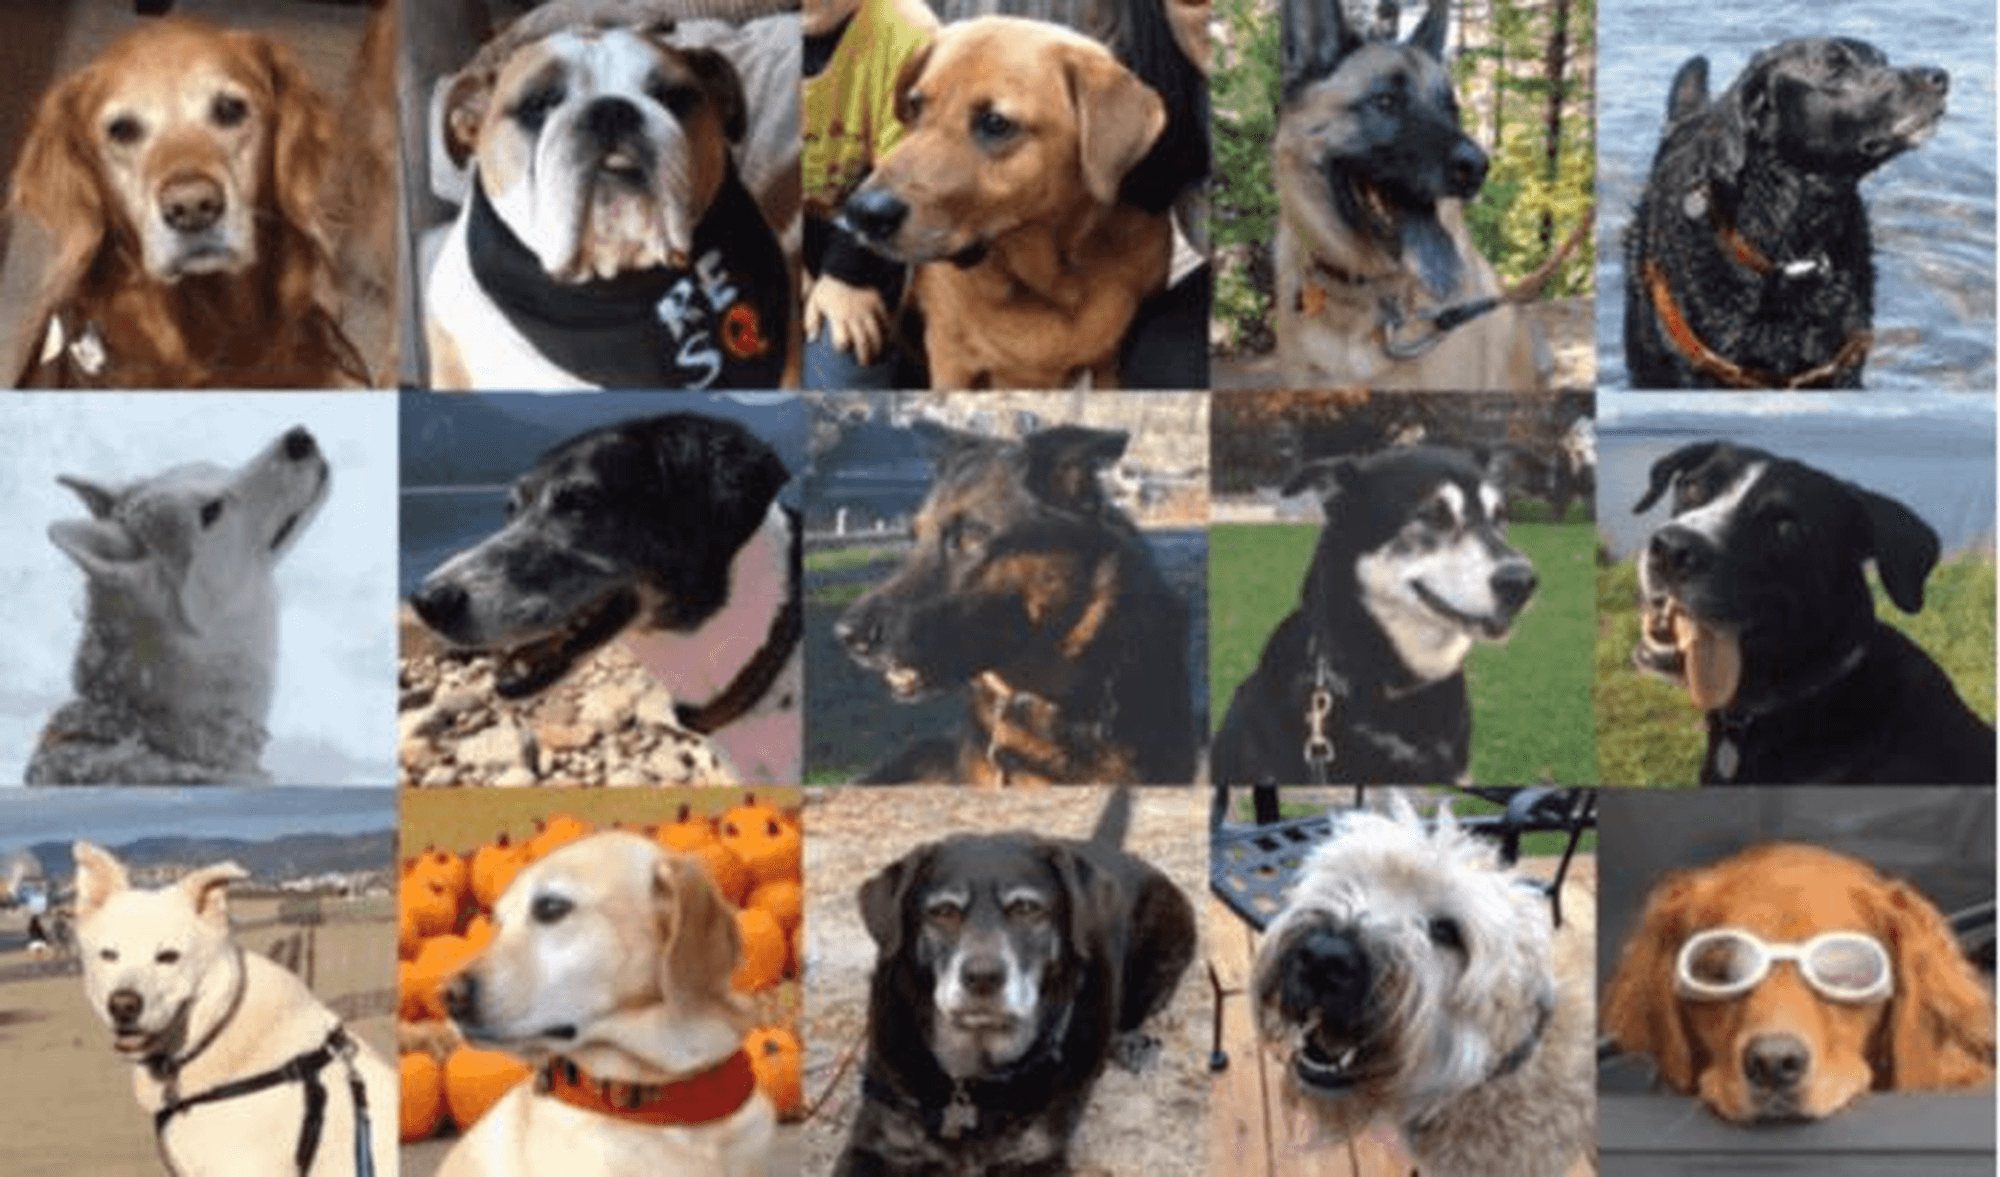 Pictures of 15 different dogs